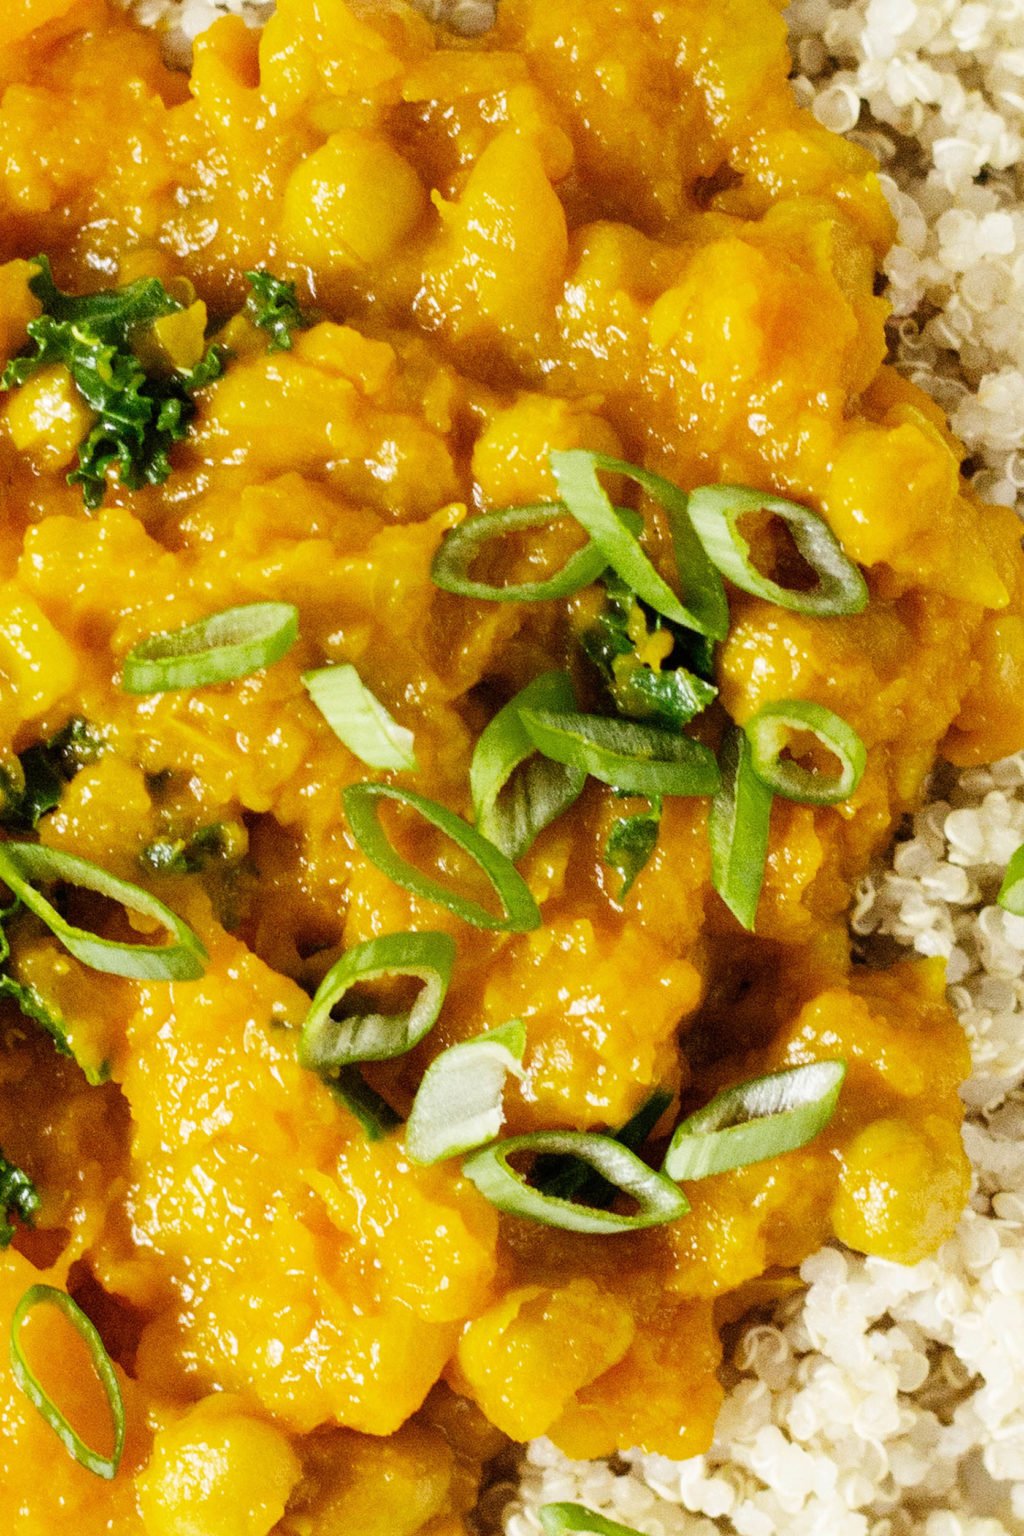 Bright and beautifully colored, vegan golden butternut squash and chickpea curry is garnished with chopped green onion tops. It's served with a whole grain for a fast and nourishing plant based meal. 